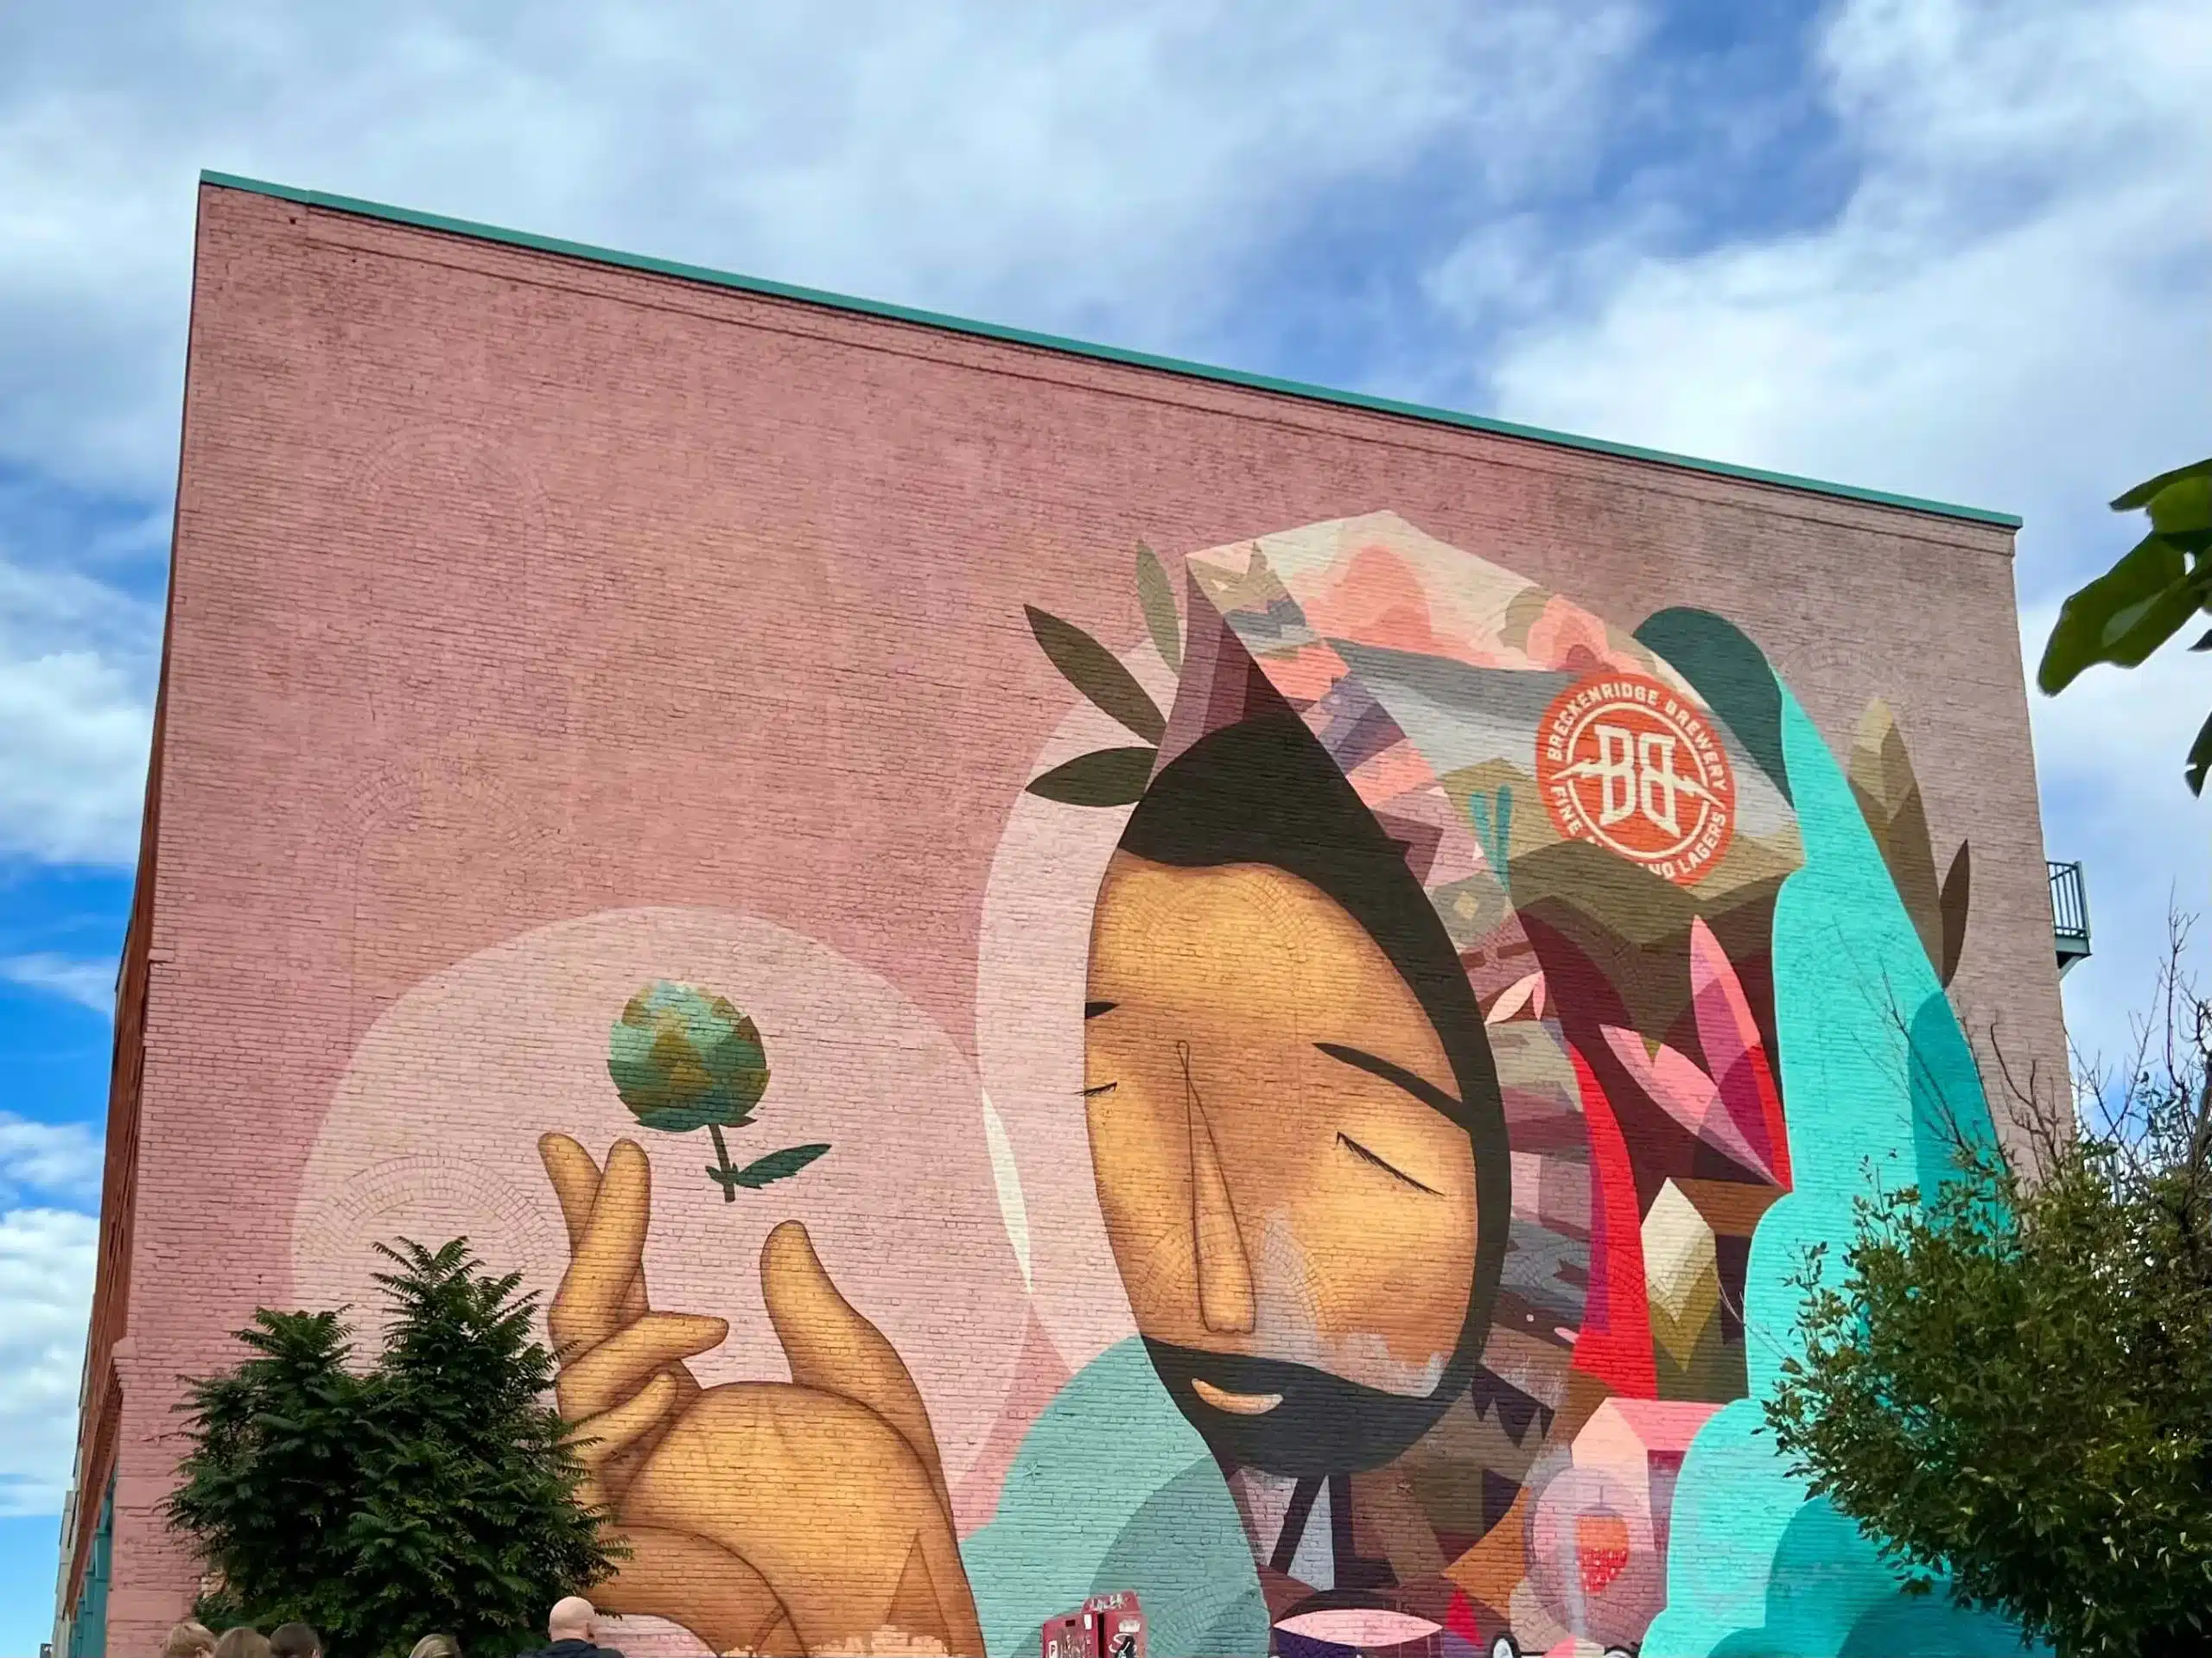 Where to Find the Best Denver Murals: A Self-Guided Tour